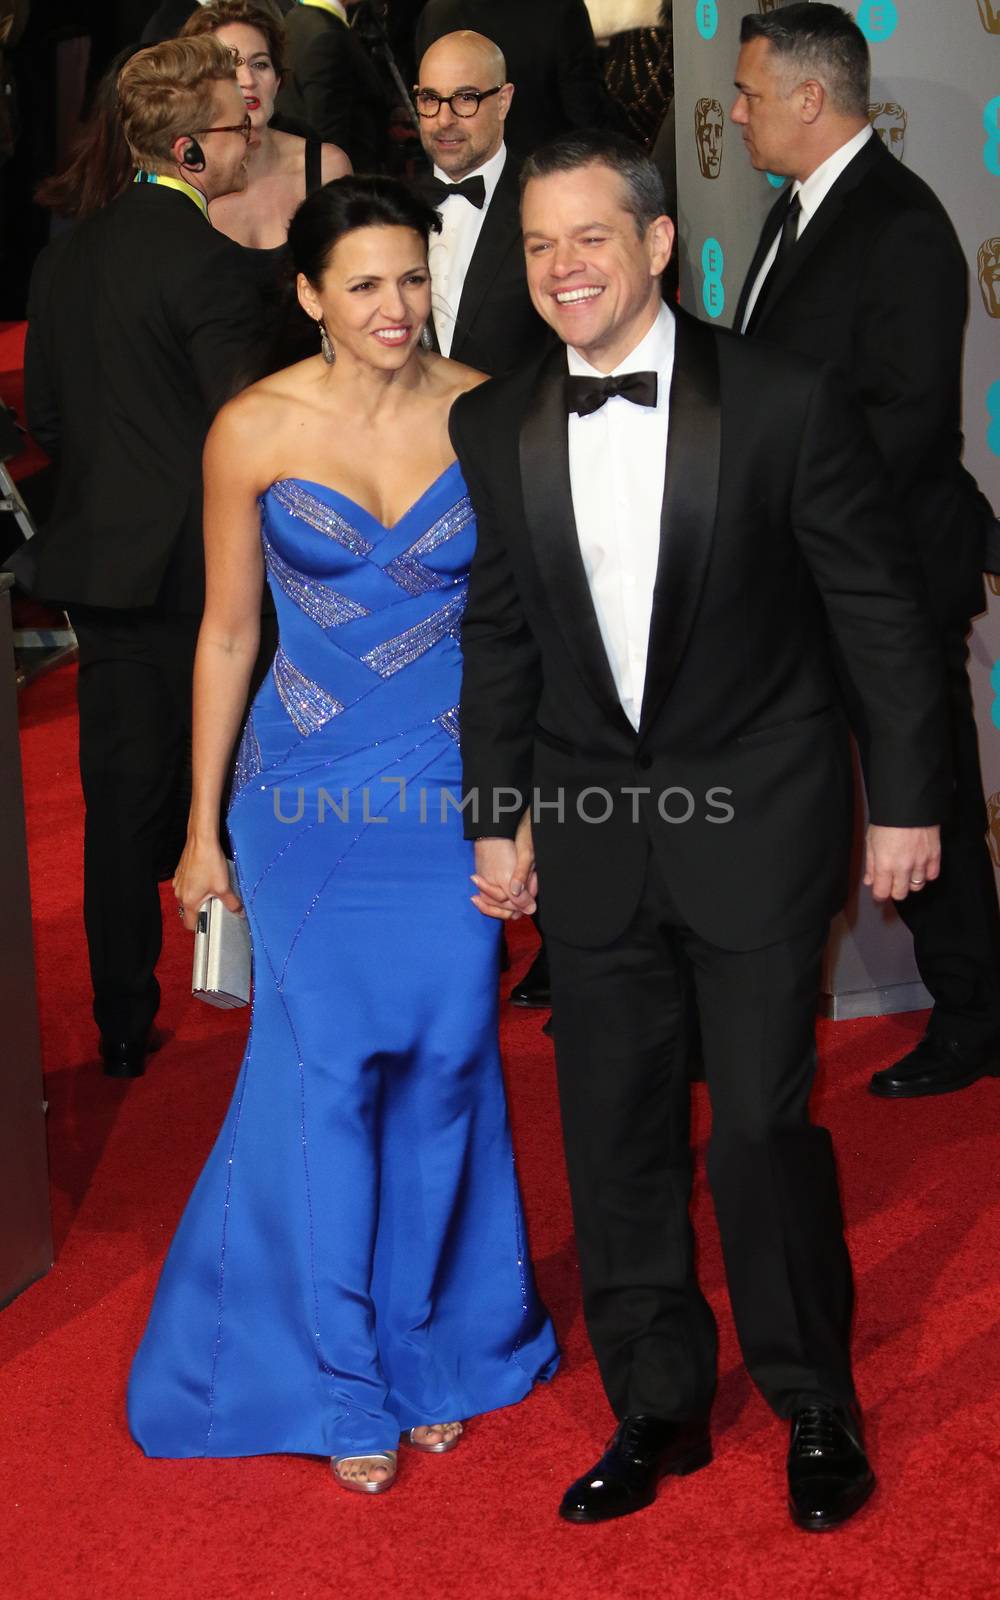 UK, London: American actor Matt Damon poses with wife Luciana Barroso on the red Carpet at the EE British Academy Film Awards, BAFTA Awards, at the Royal Opera House in London, England, on 14 February 2016.